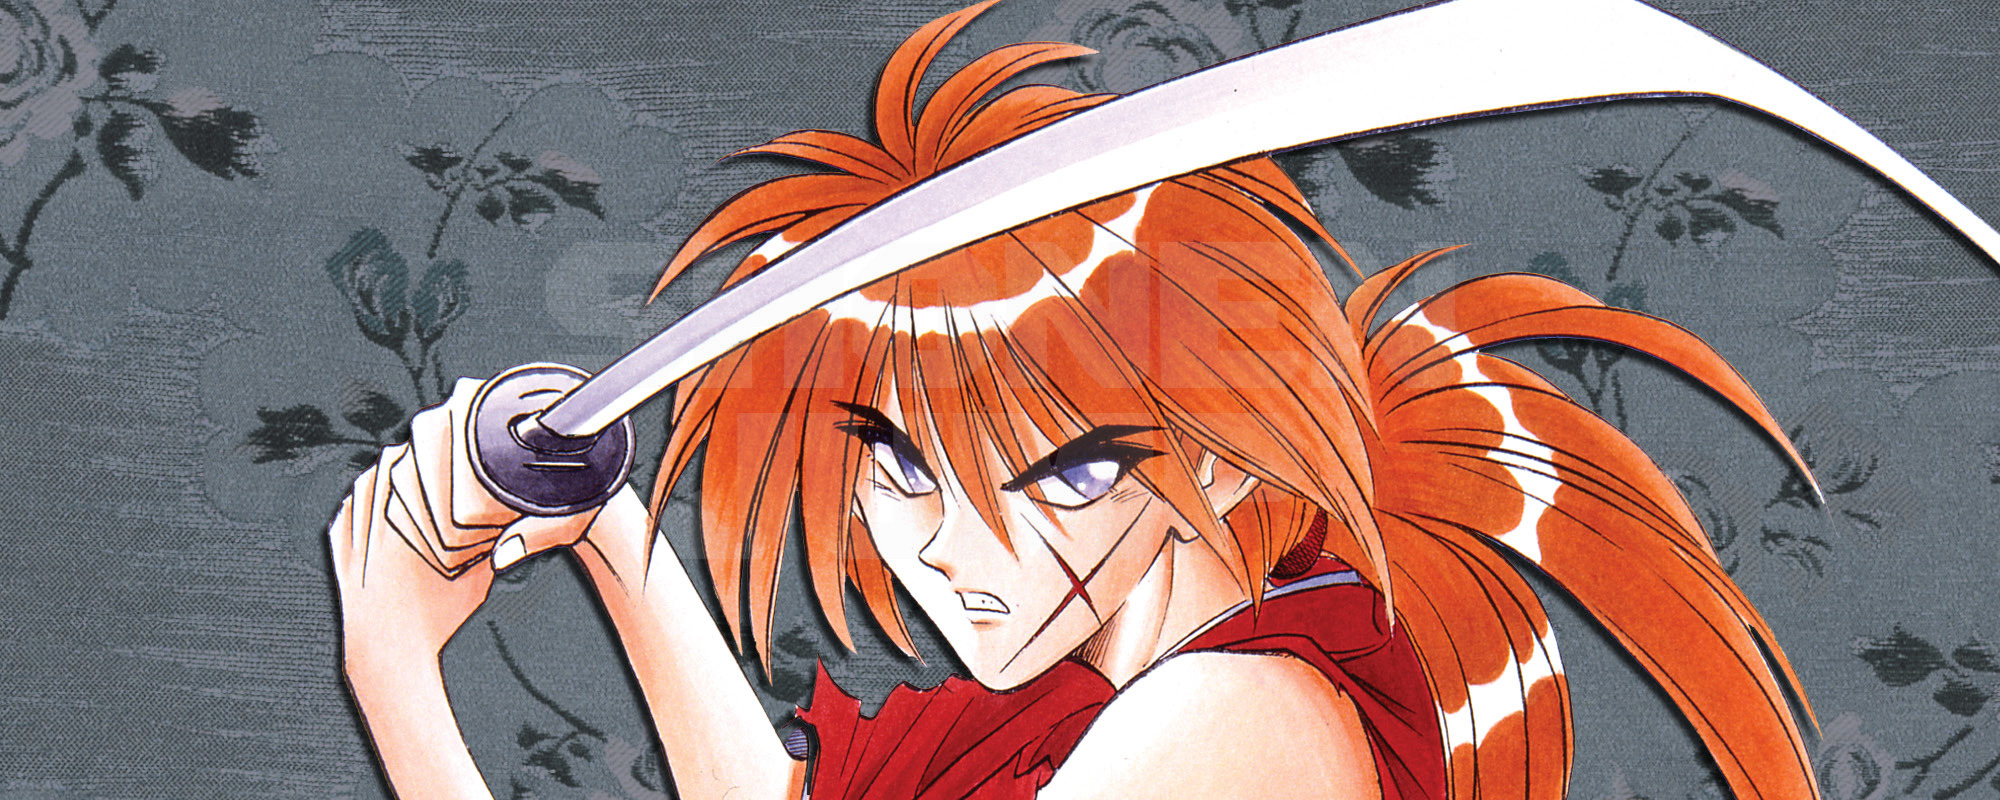 I know that this is a promotional art but what animated work is this in  respect of Was there an OVA where Kenshin fights Enishi This looks so  similar to the Trust